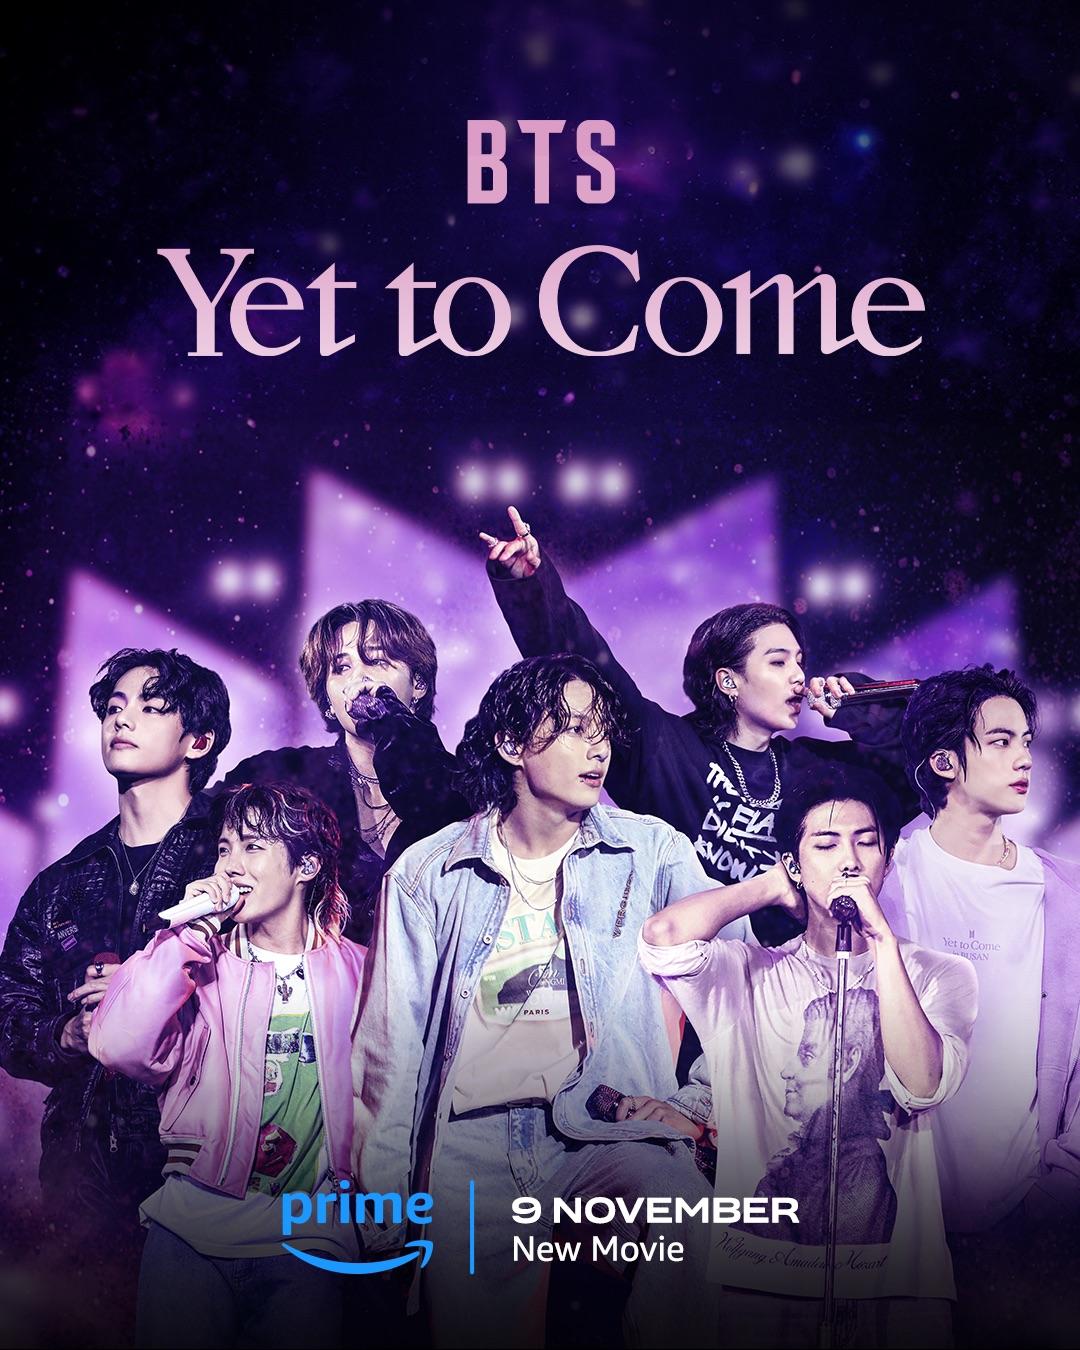 [Prime Video] 40 million album sales and counting. They're not stopping. BTS: Yet to Come premieres November 9. - 251023